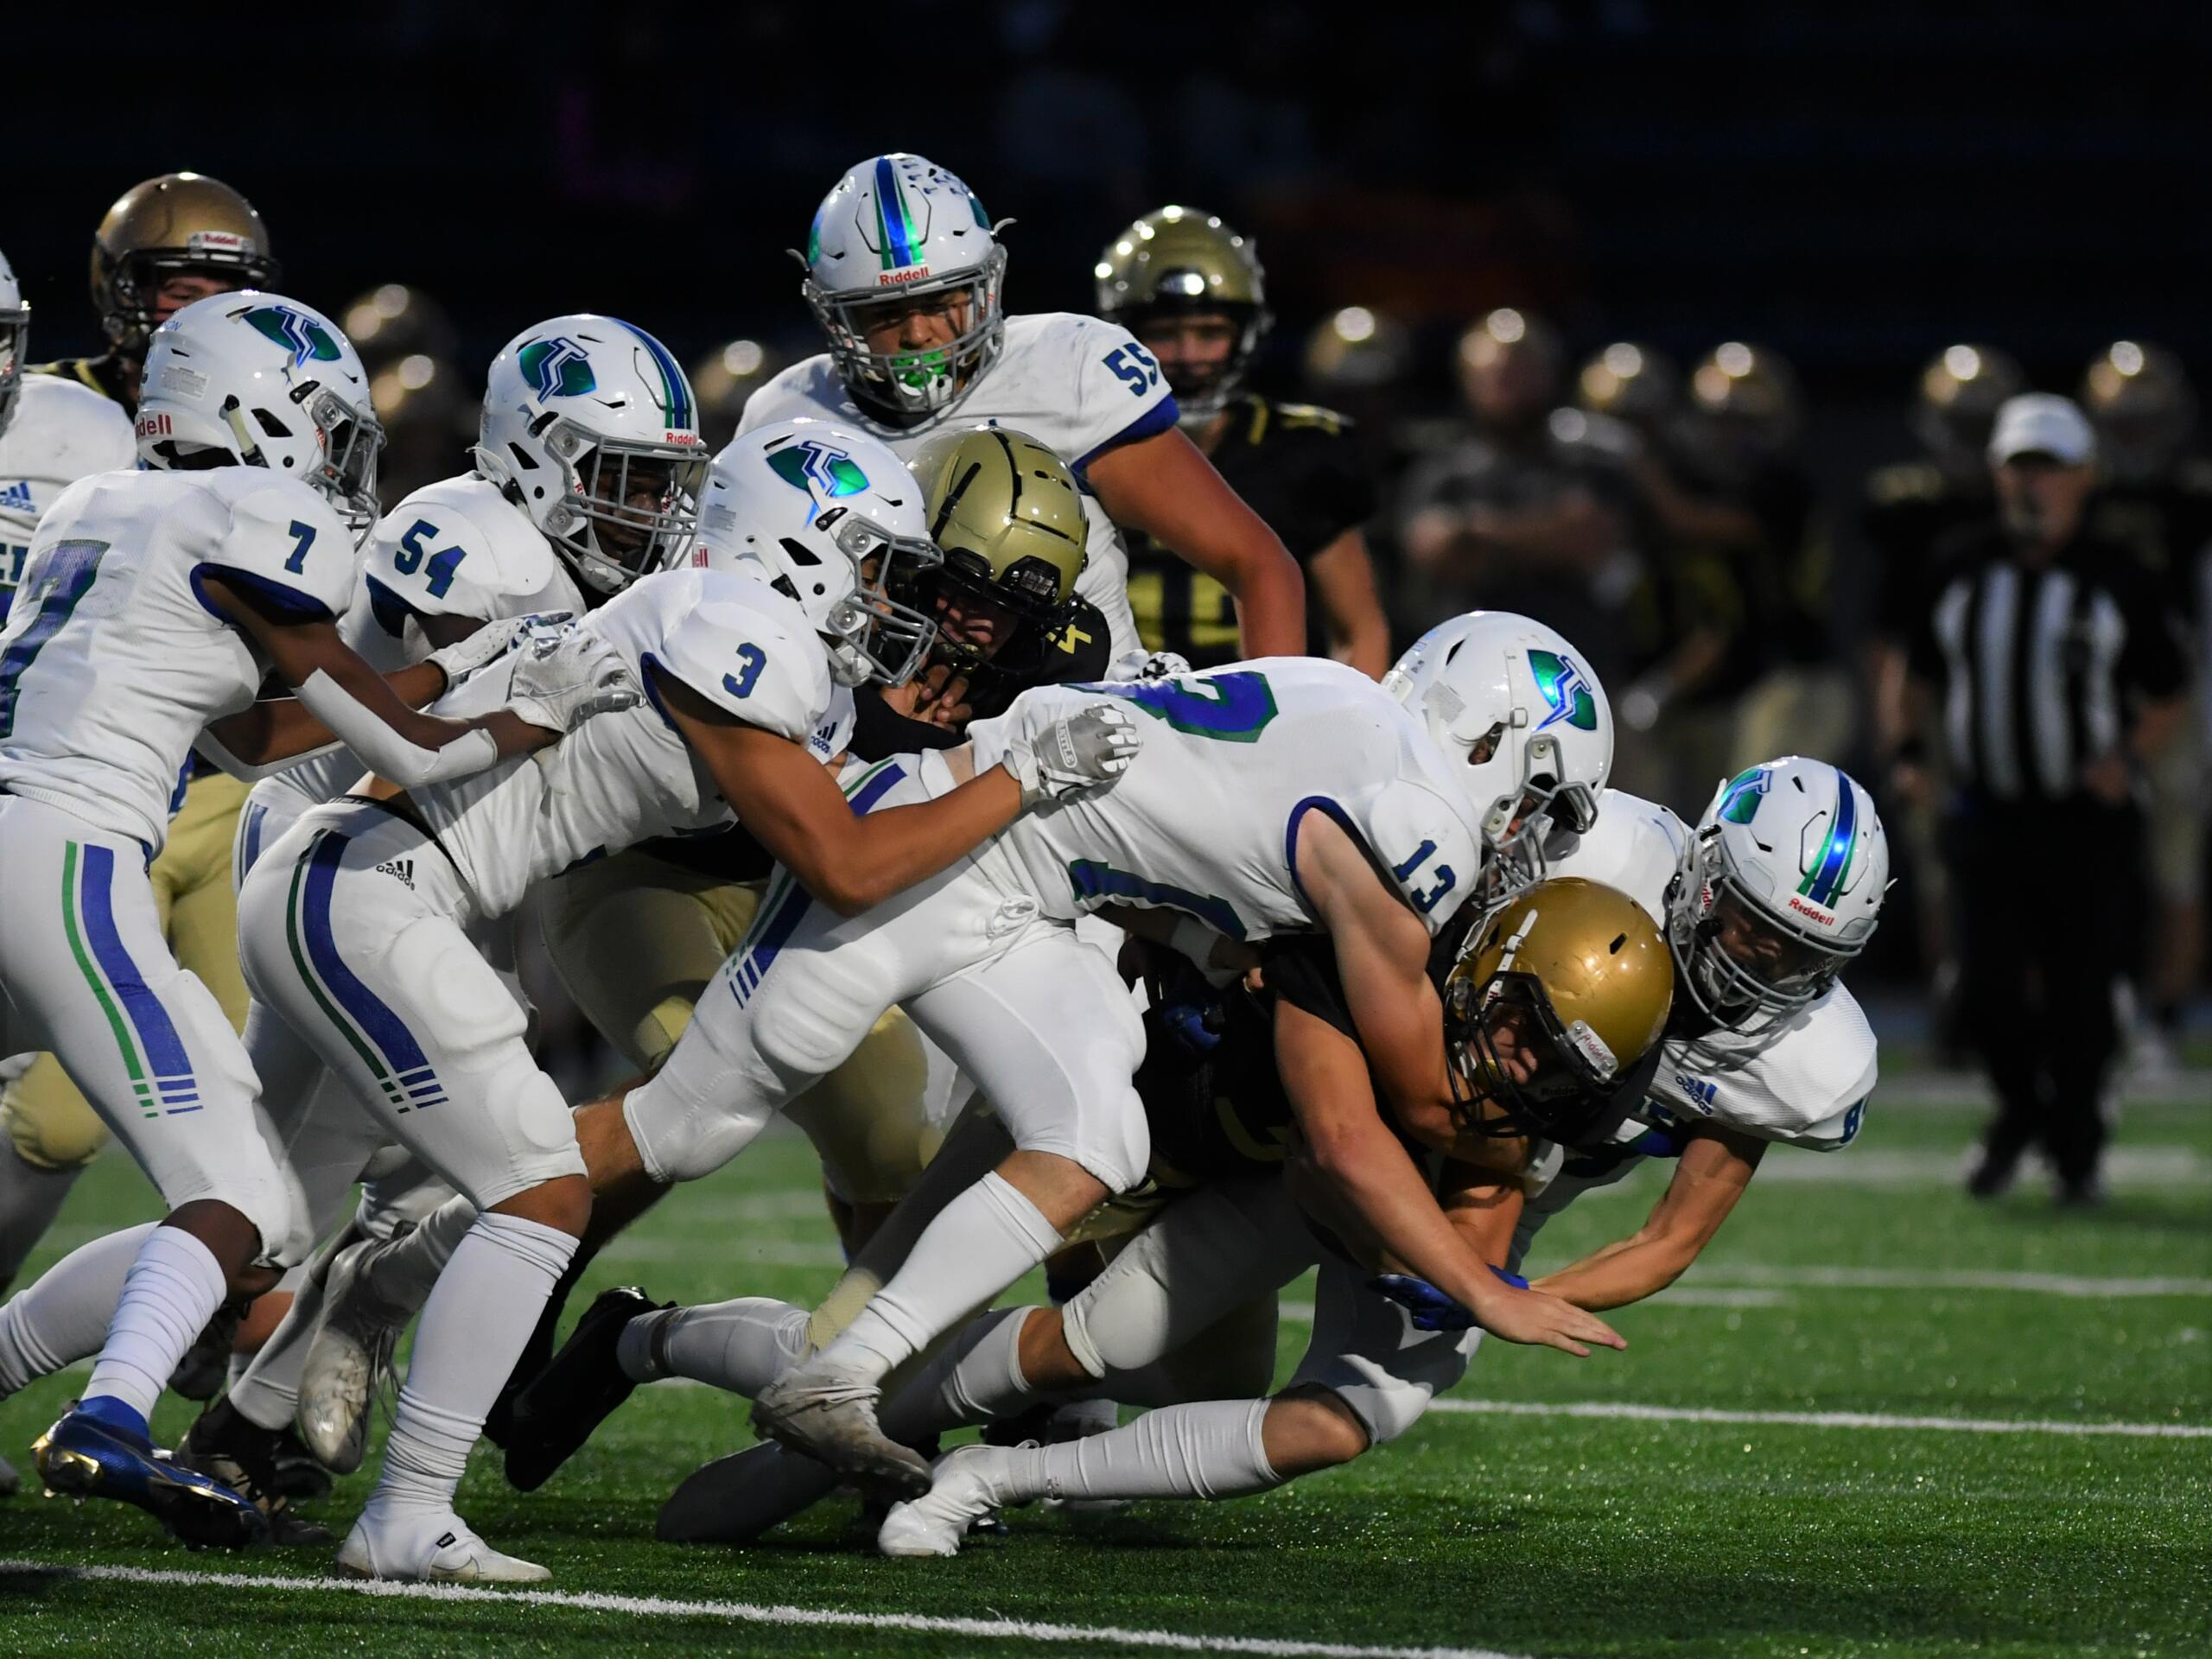 A host of Mountain View defenders combine to take down Kelso tailback Conner Noah in the first quarter of MV’s 20-17 win over the Hilanders at Schroeder Field on Oct.